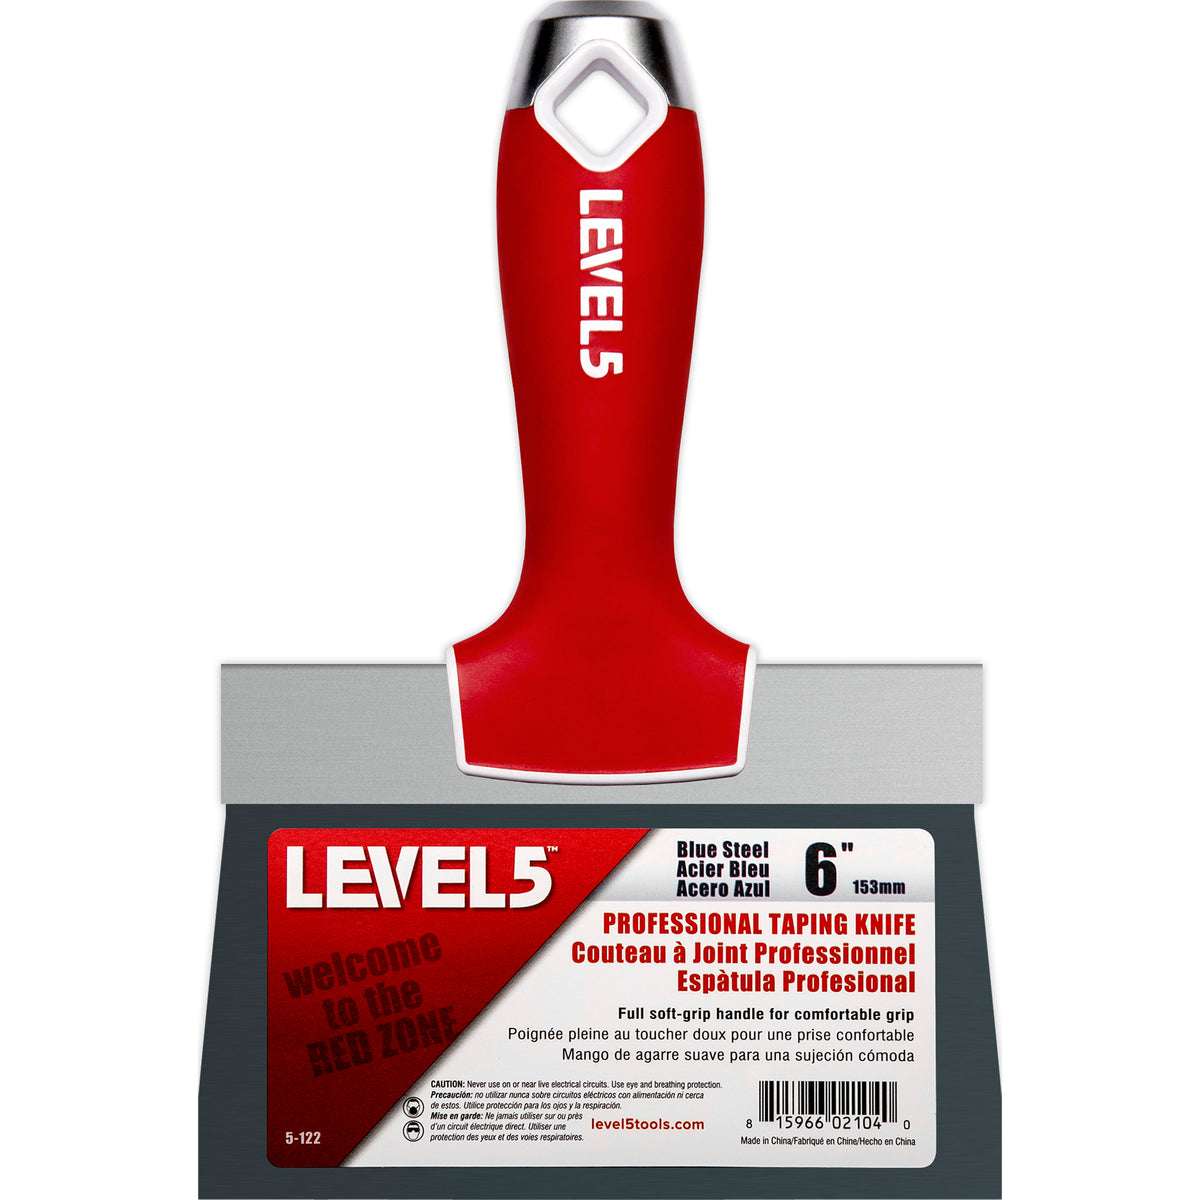 Level 5 Blue Steel Taping Knife - Soft Grip